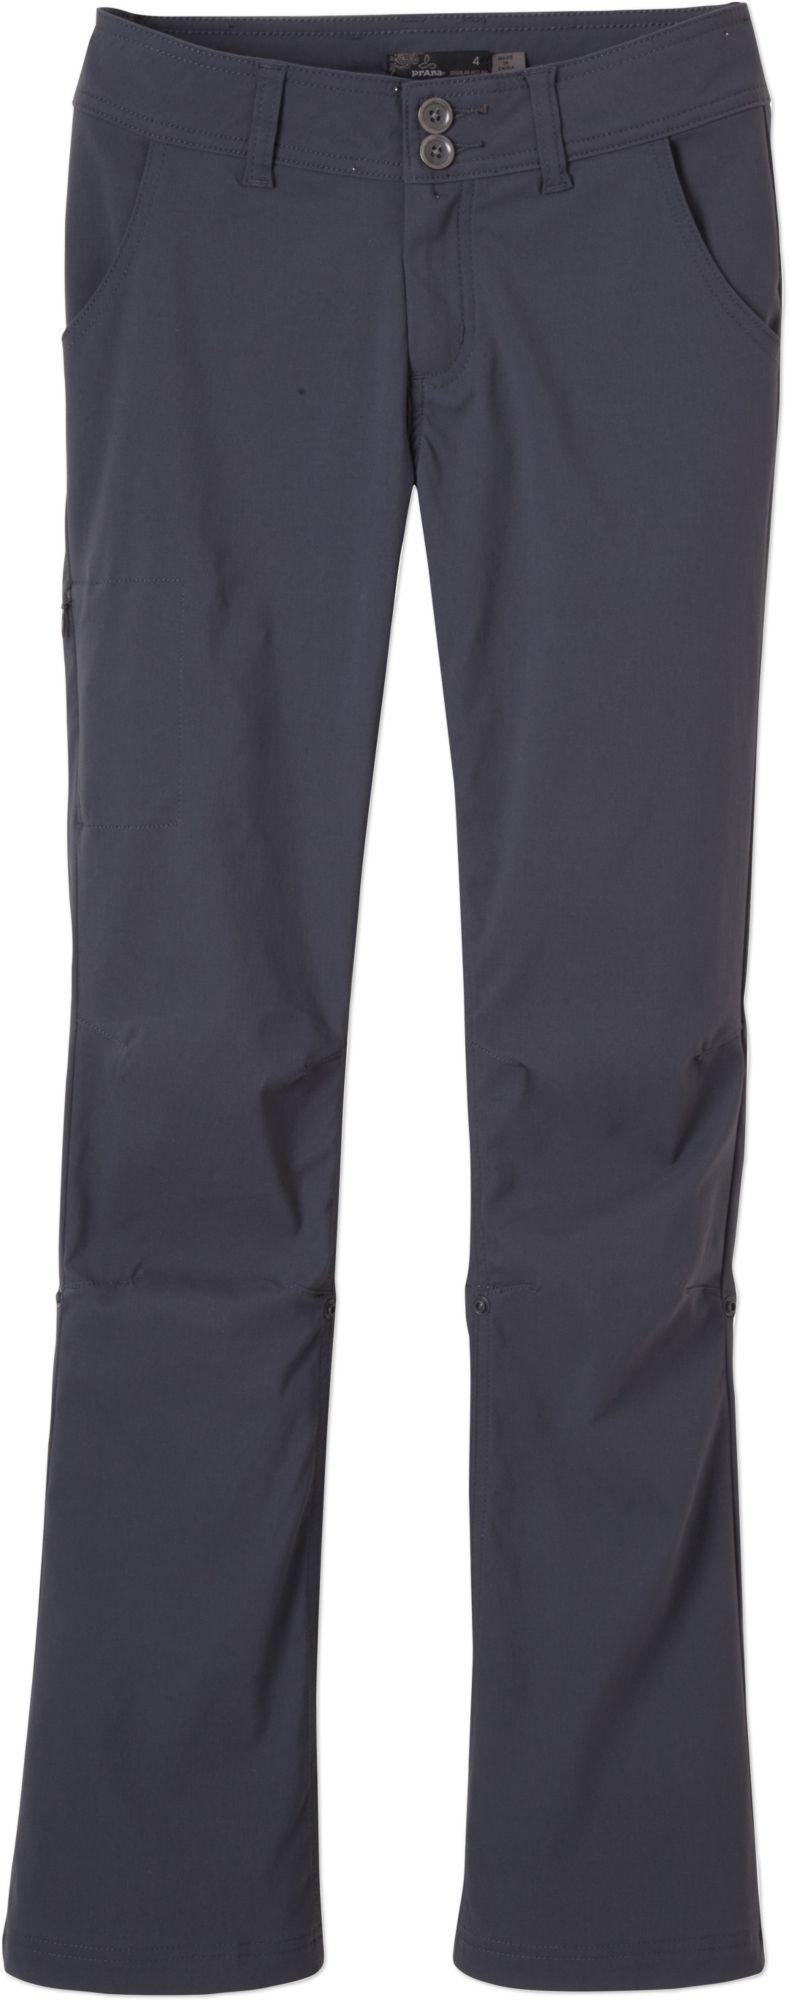 Prana Synthetic Halle Pants in Blue - Lyst